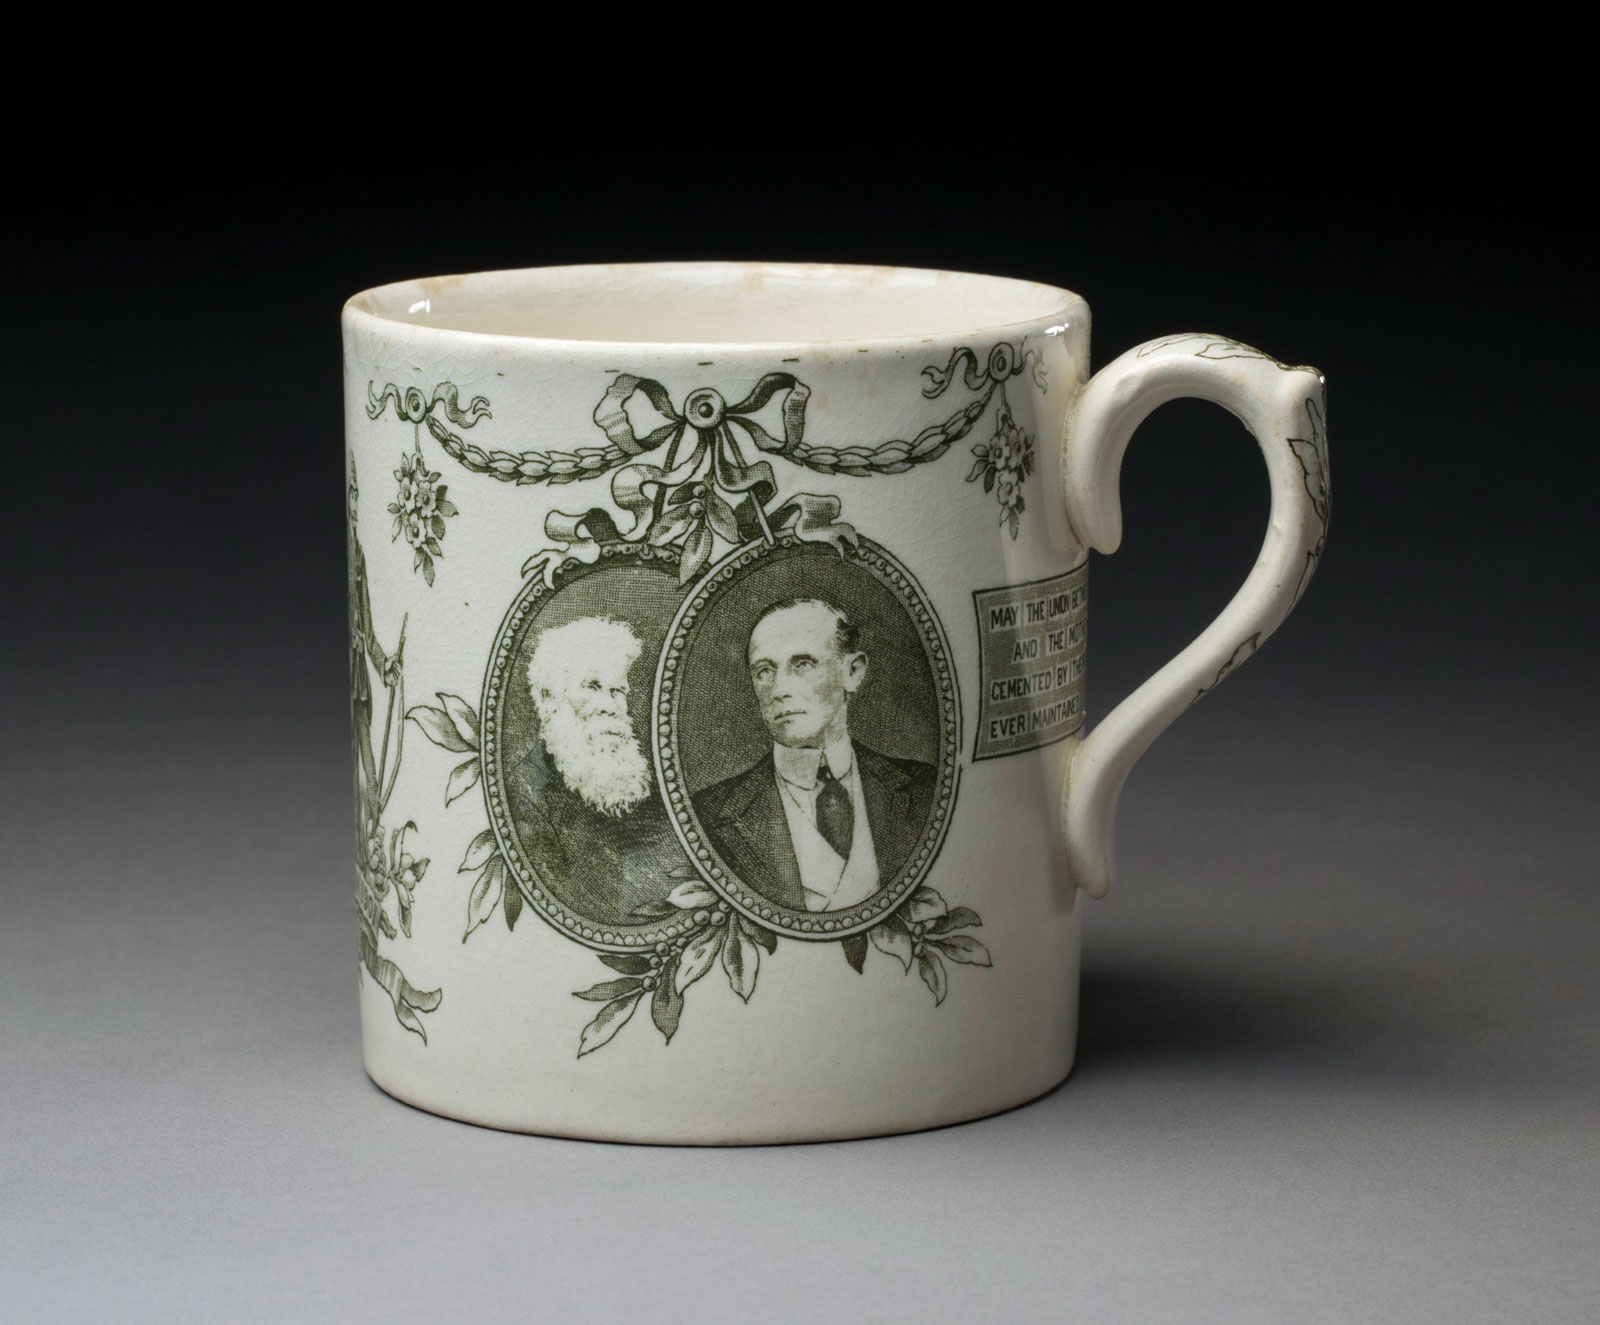 <p>A commemorative Federation mug with portraits of Sir Henry Parkes and the Governor-General, Lord Hopetoun</p>
